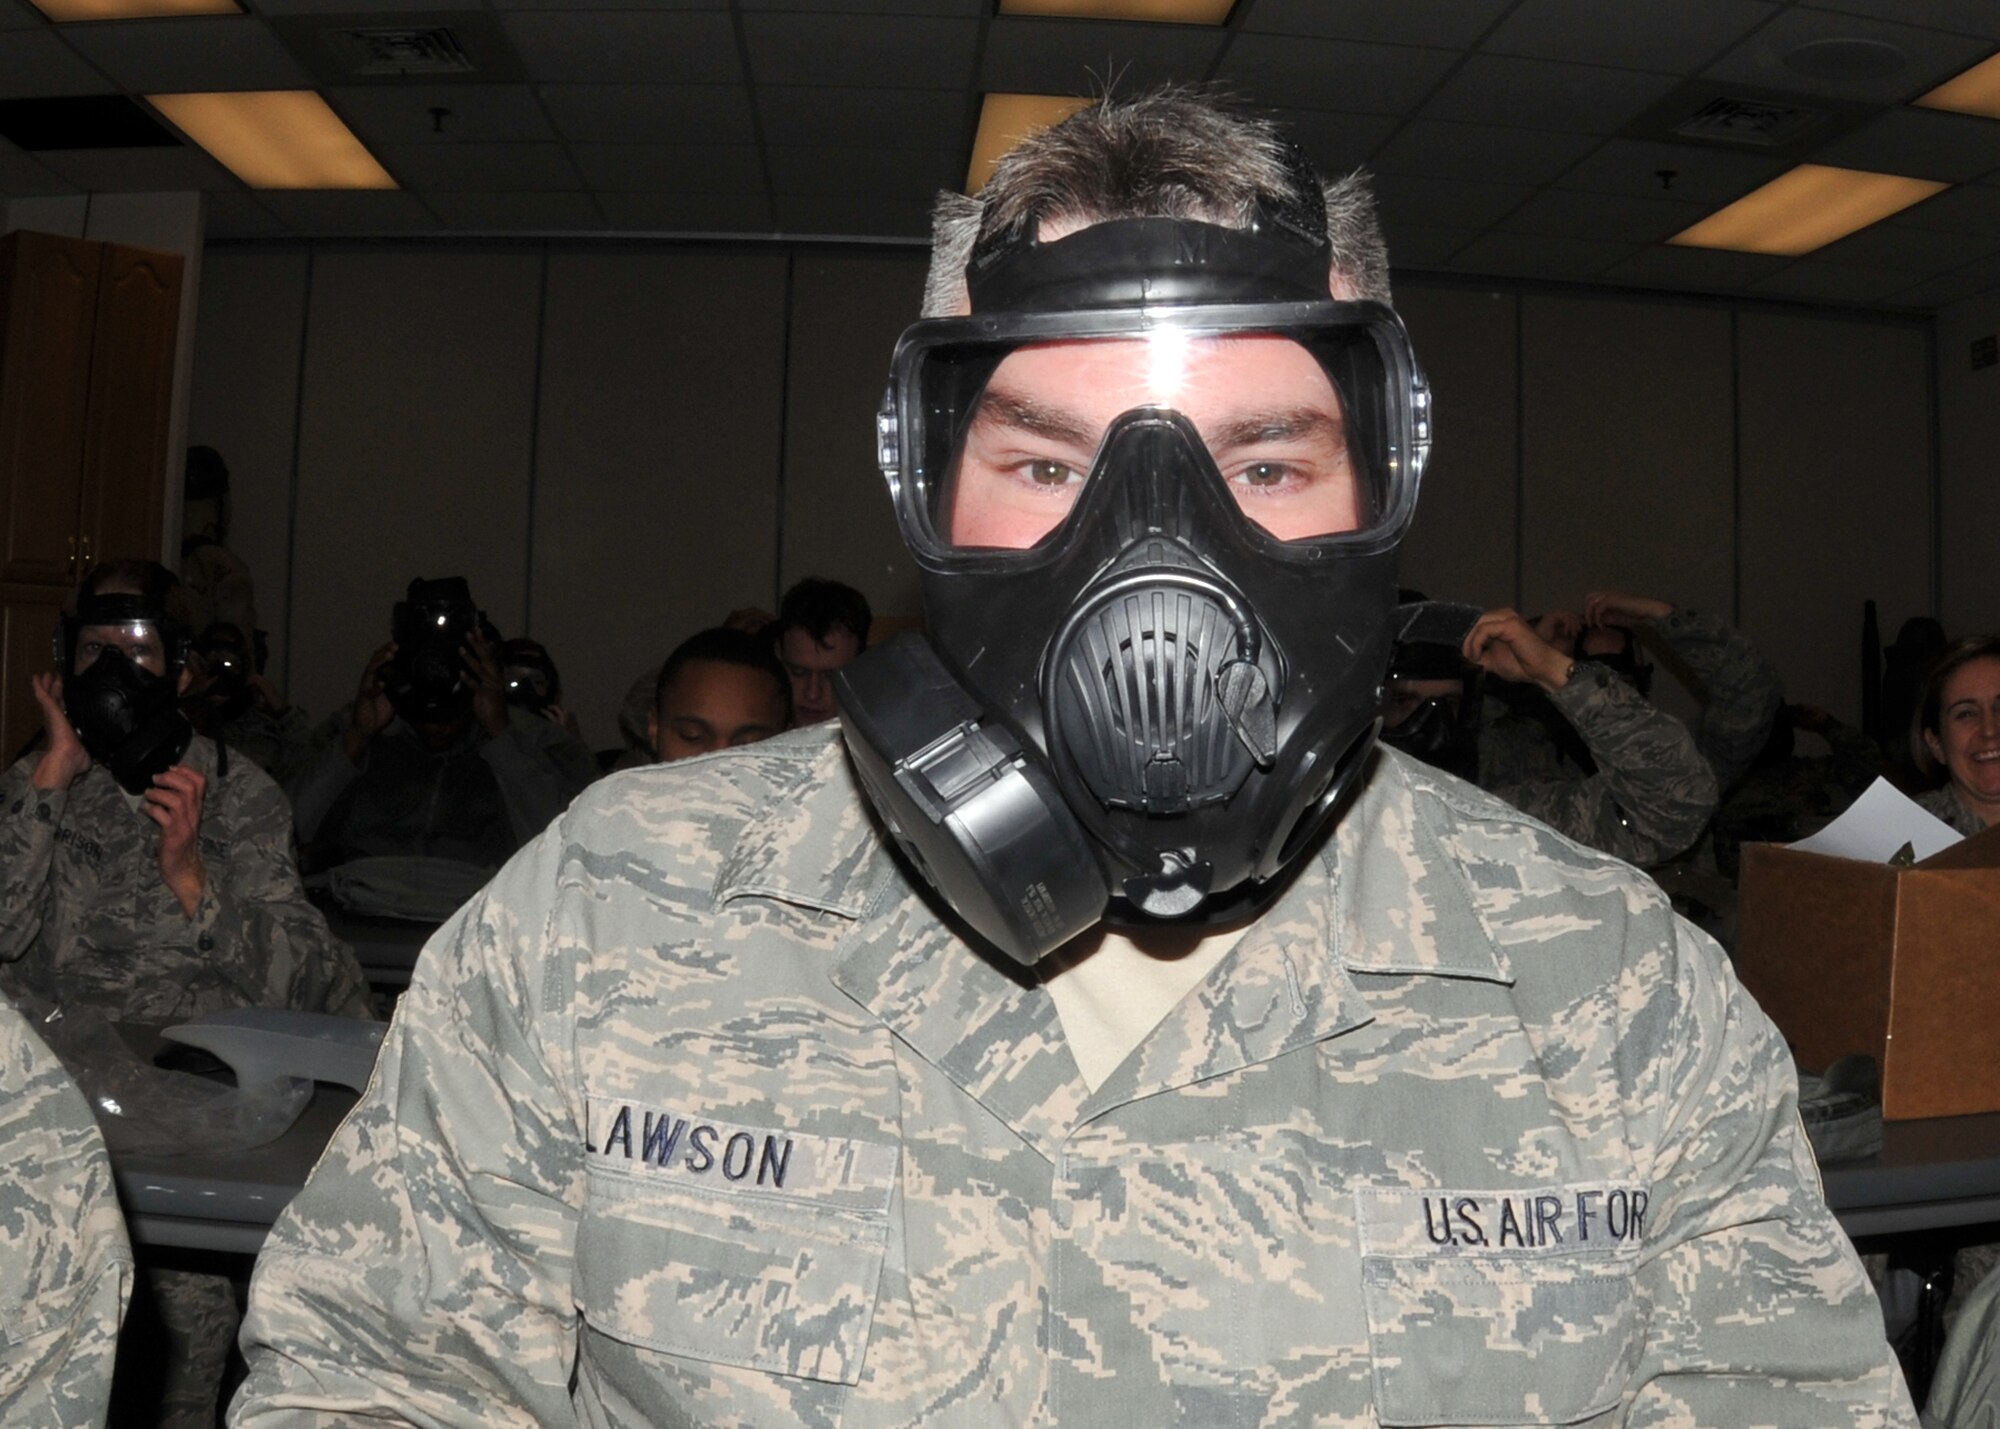 914th Airlift Wing member Senior Master Sgt. Keith Lawson being issued and trained in the basics of the new M50 Joint Service General Purpose Mask January 9 2011 Niagara Falls Air Reserve Station, Niagara Falls, NY. The M50 Joint Service General Purpose Mask will be the standard for the United States armed Forces. (U.S. Air Force photo by Staff Sgt. Joseph McKee)